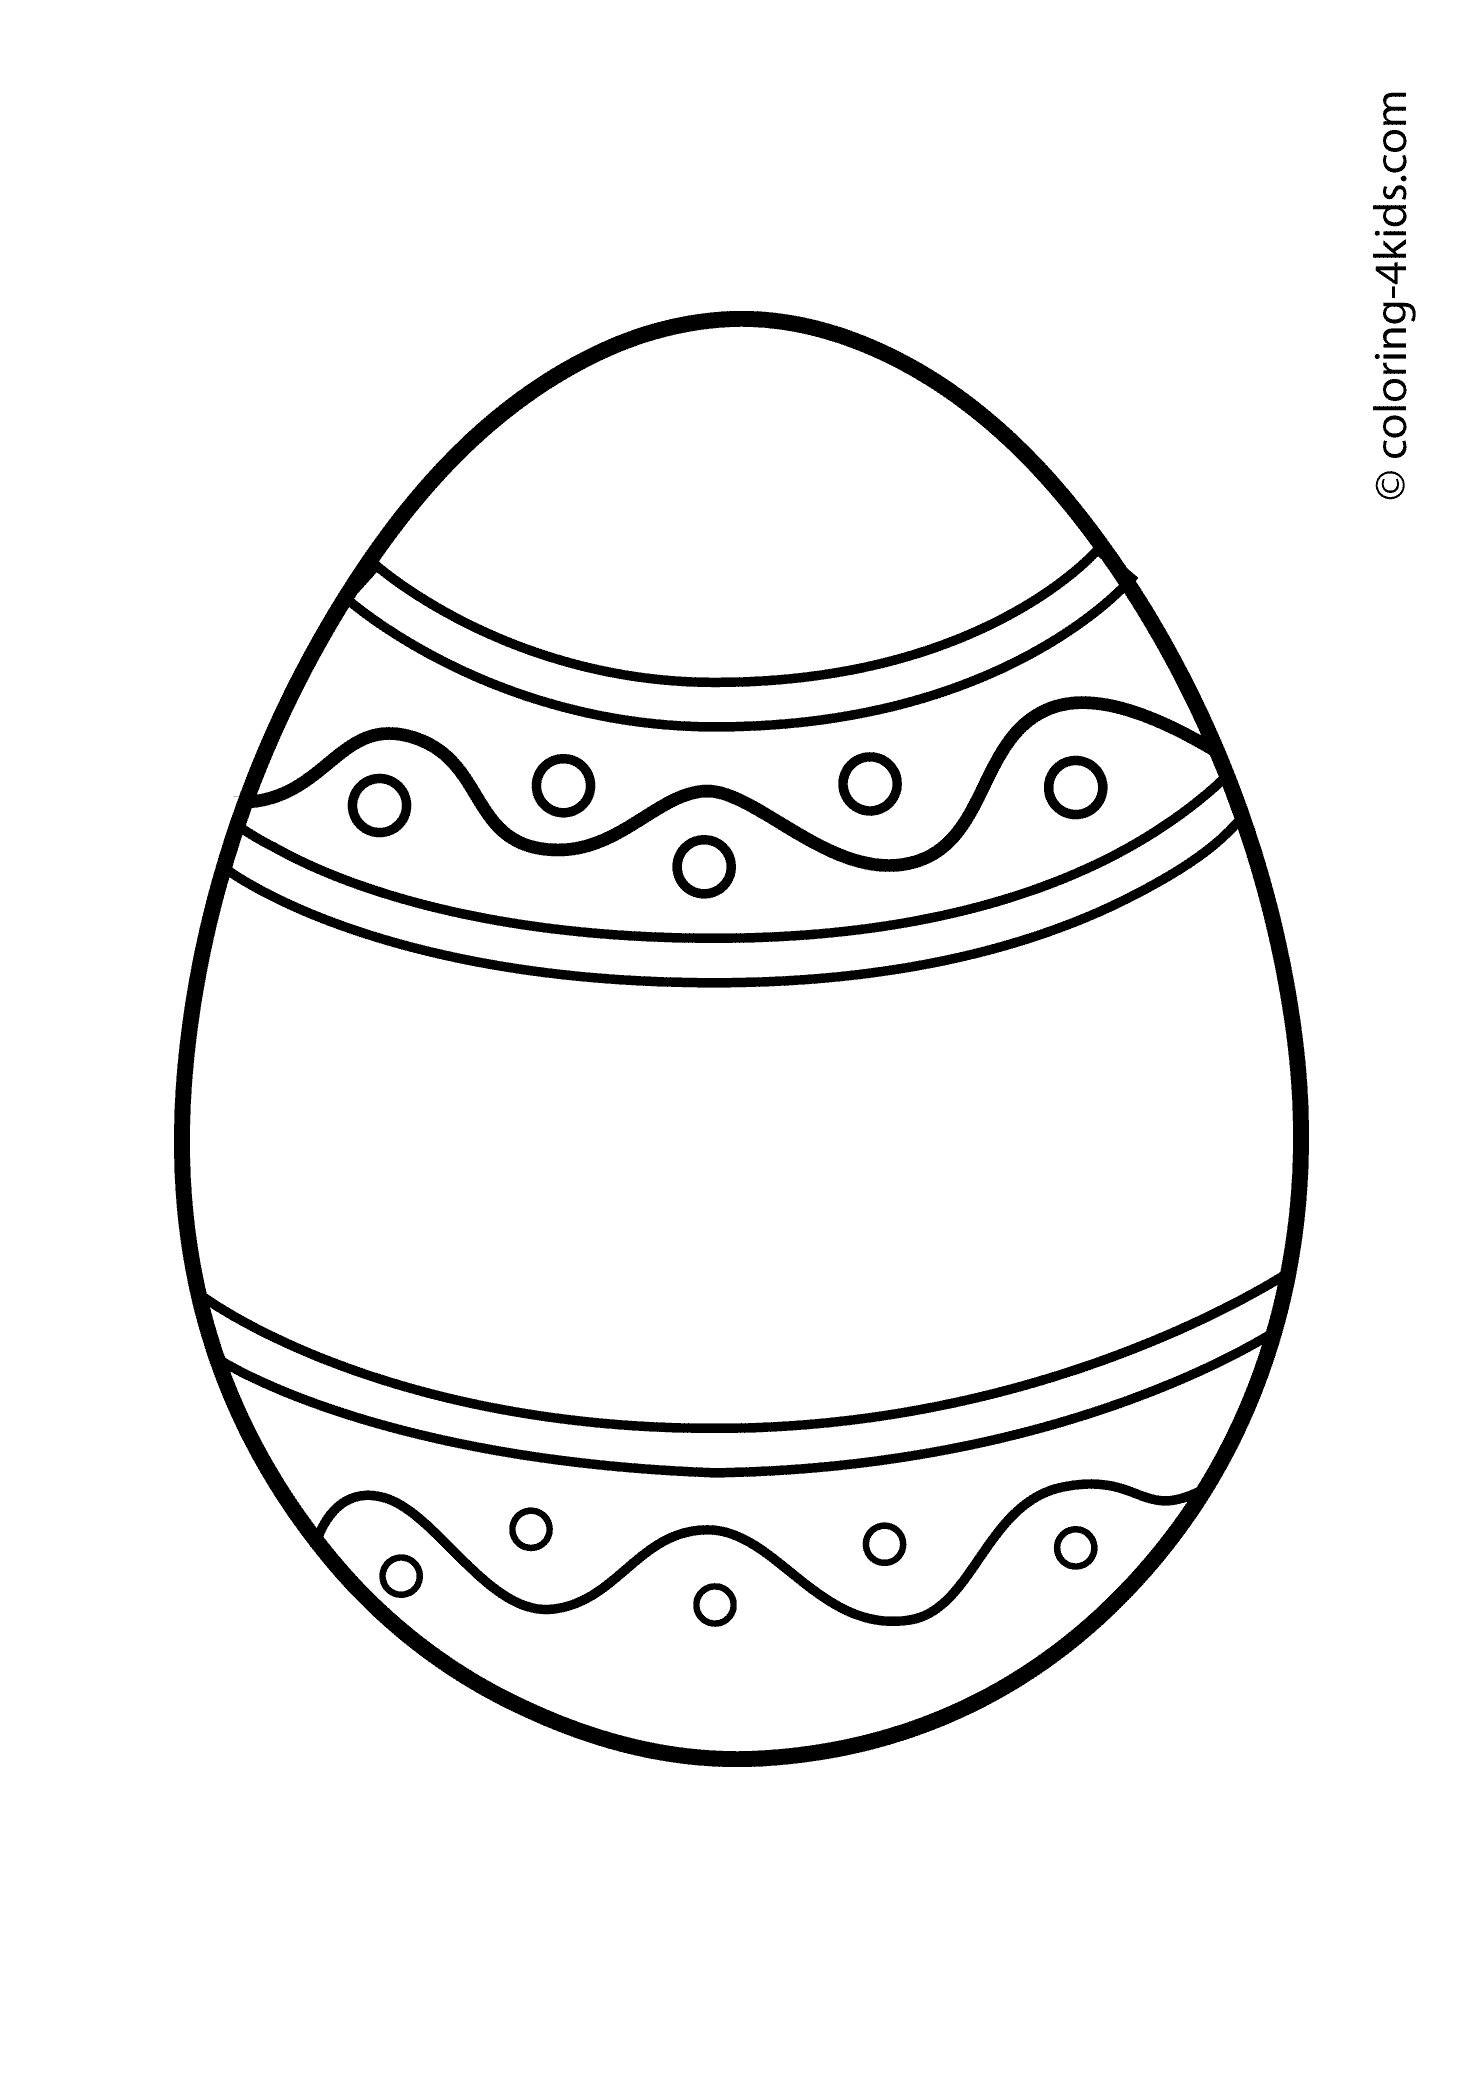 Delightful easter egg coloring pages for kids